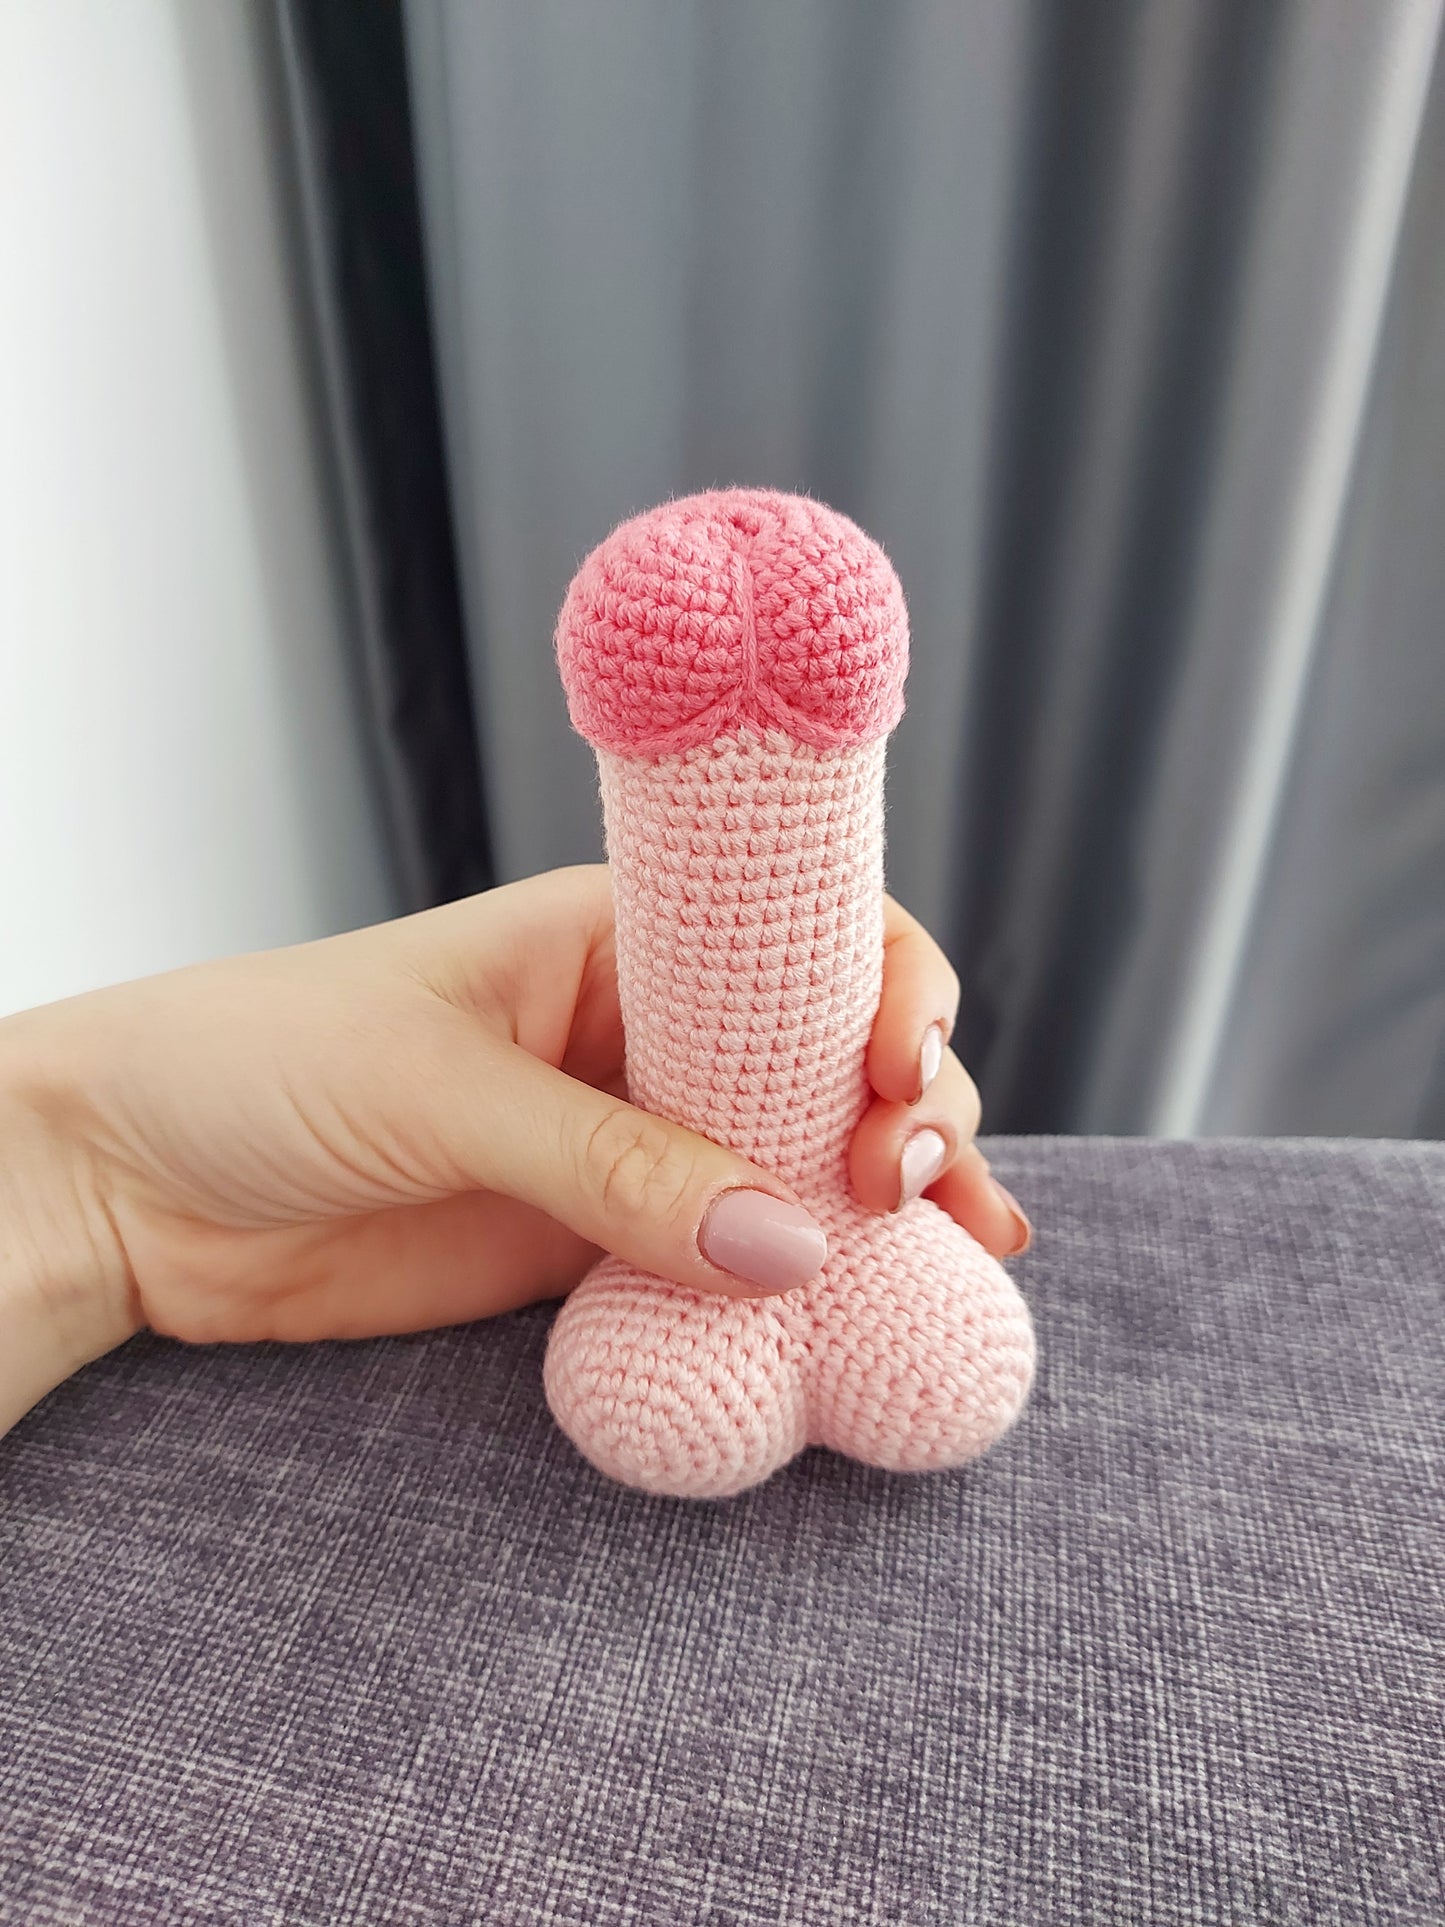 Crochet penis toy pattern, Amigurumi pattern for beginner, Crochet penis Pdf photo tutorial, Funny mature gift for her